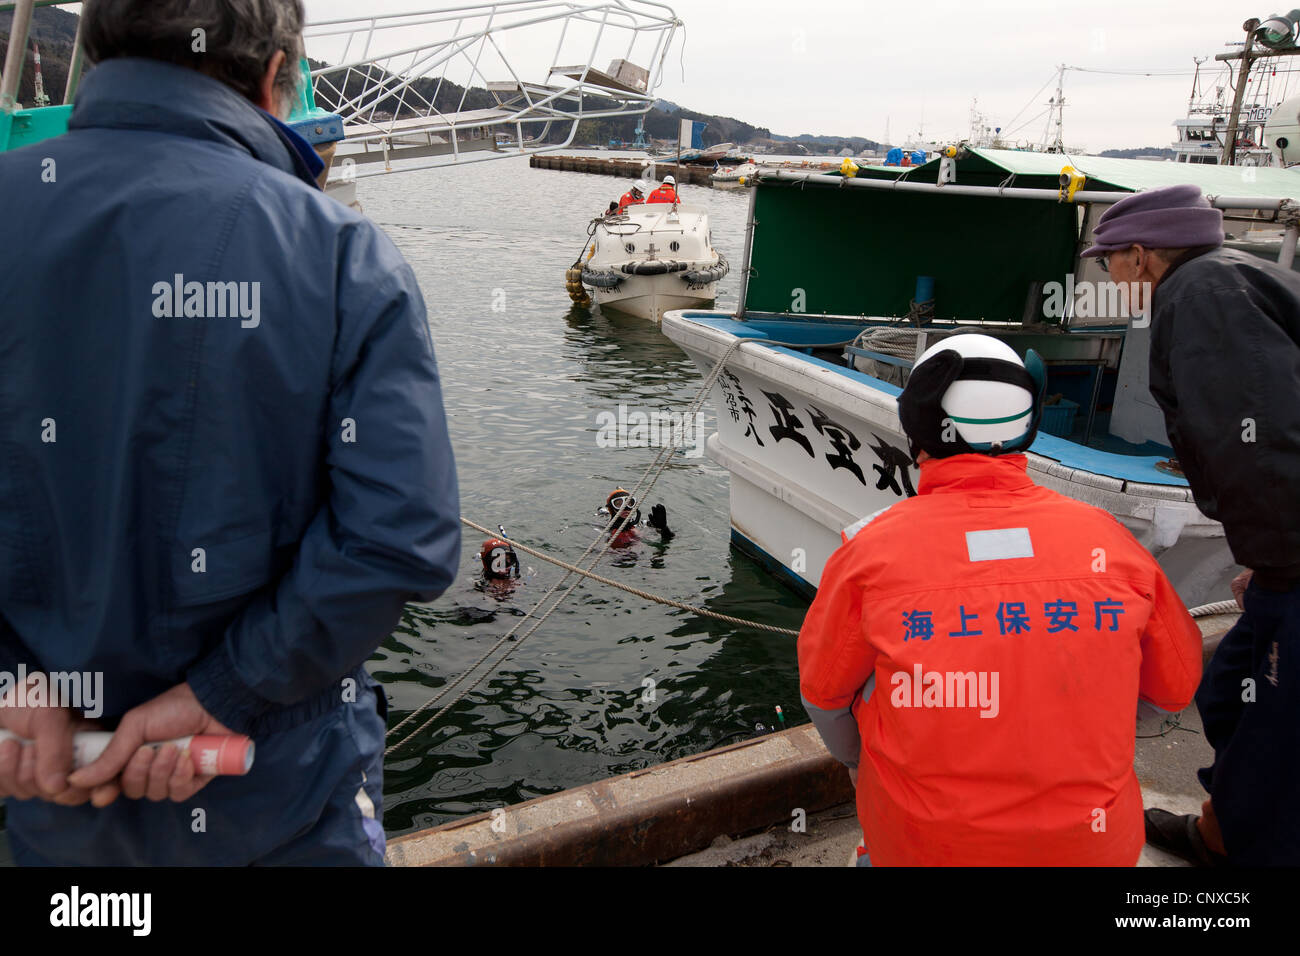 Japanese coast guard search underwater for the bodies of victims of the March2011 tsunami, in Kesennuma harbour, Tohoku, Japan. Stock Photo